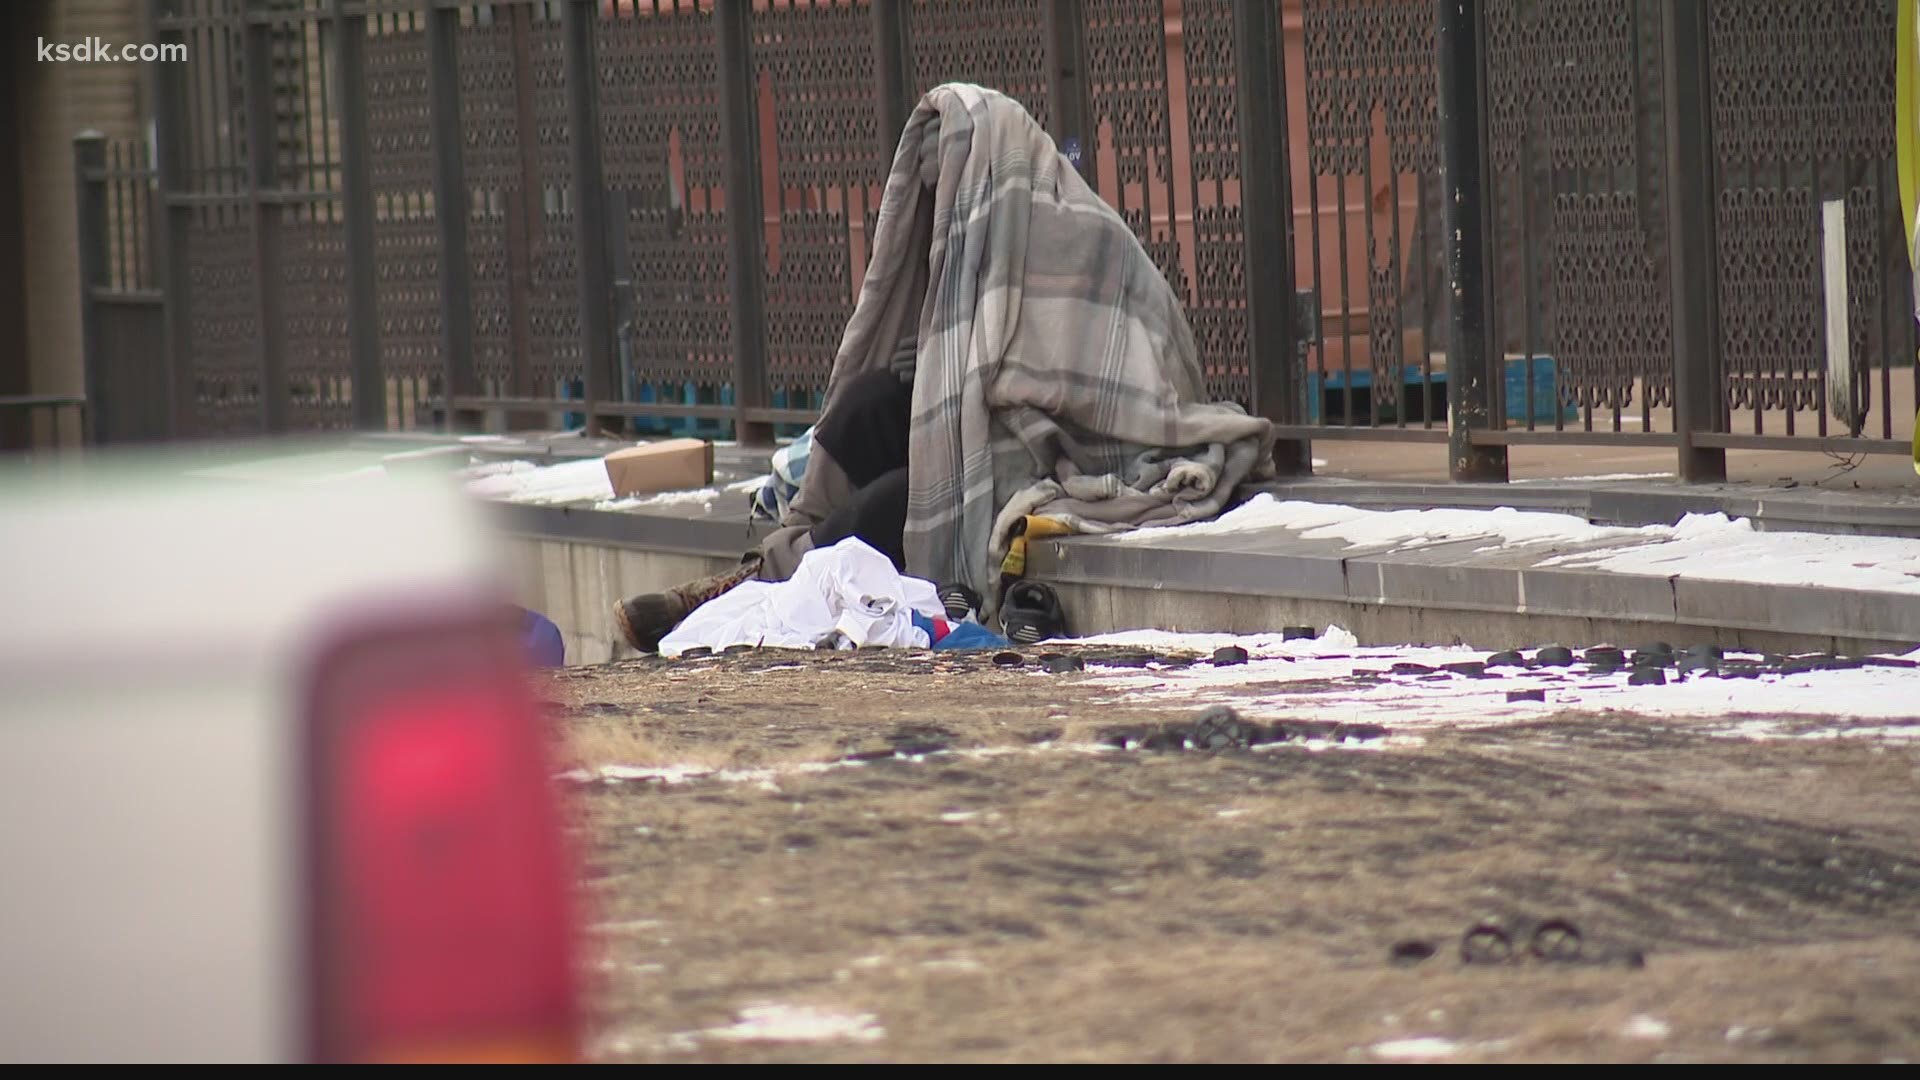 Advocates are calling for more shelters and fewer restrictions during a stretch of extreme cold.